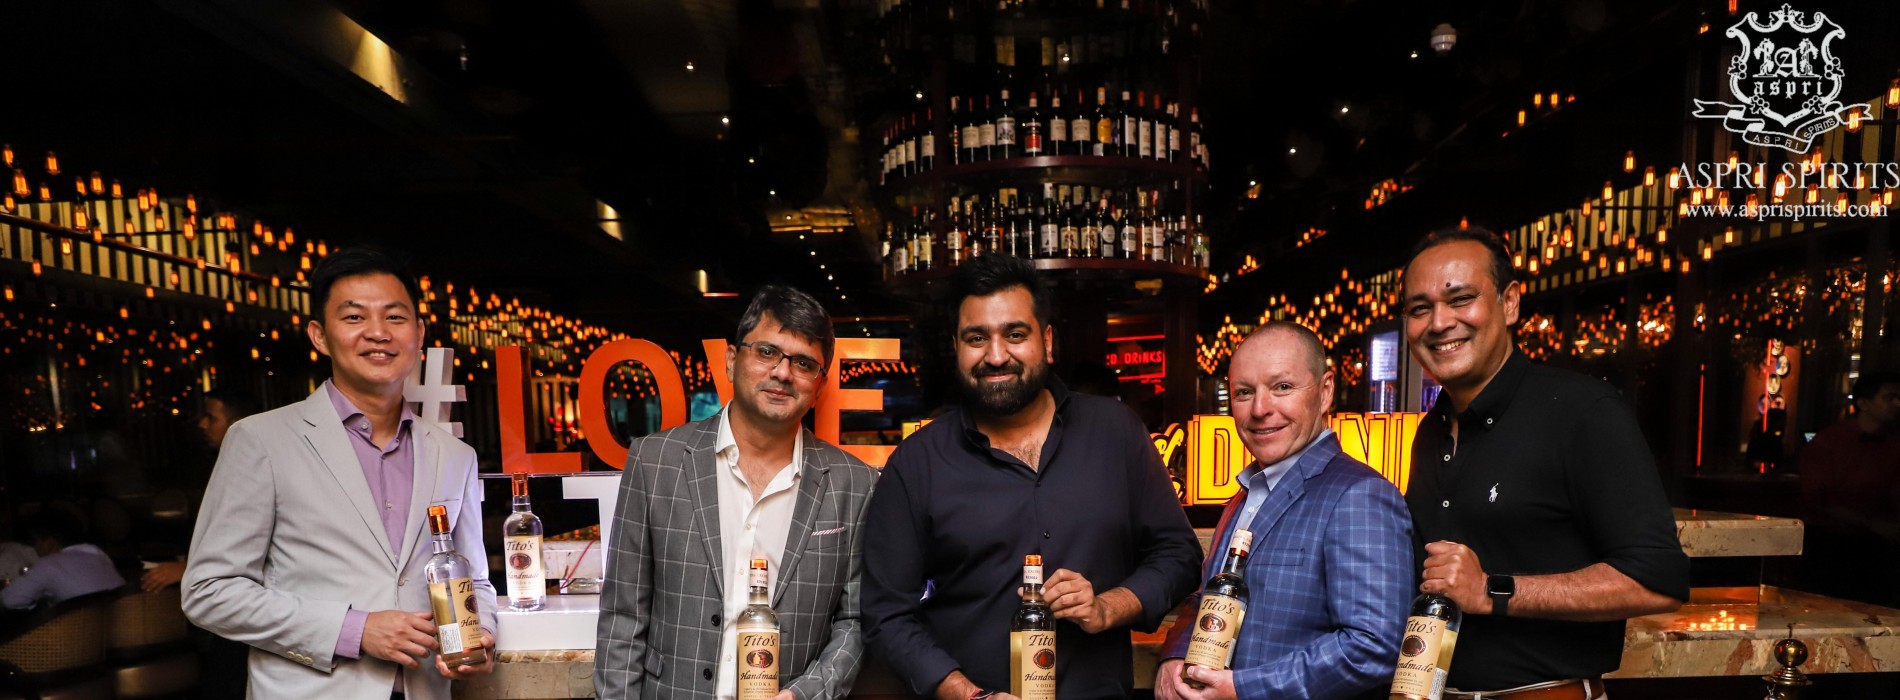 Aspri Spirits hosts a party to celebrate the launch of Tito’s handmade Vodka in India